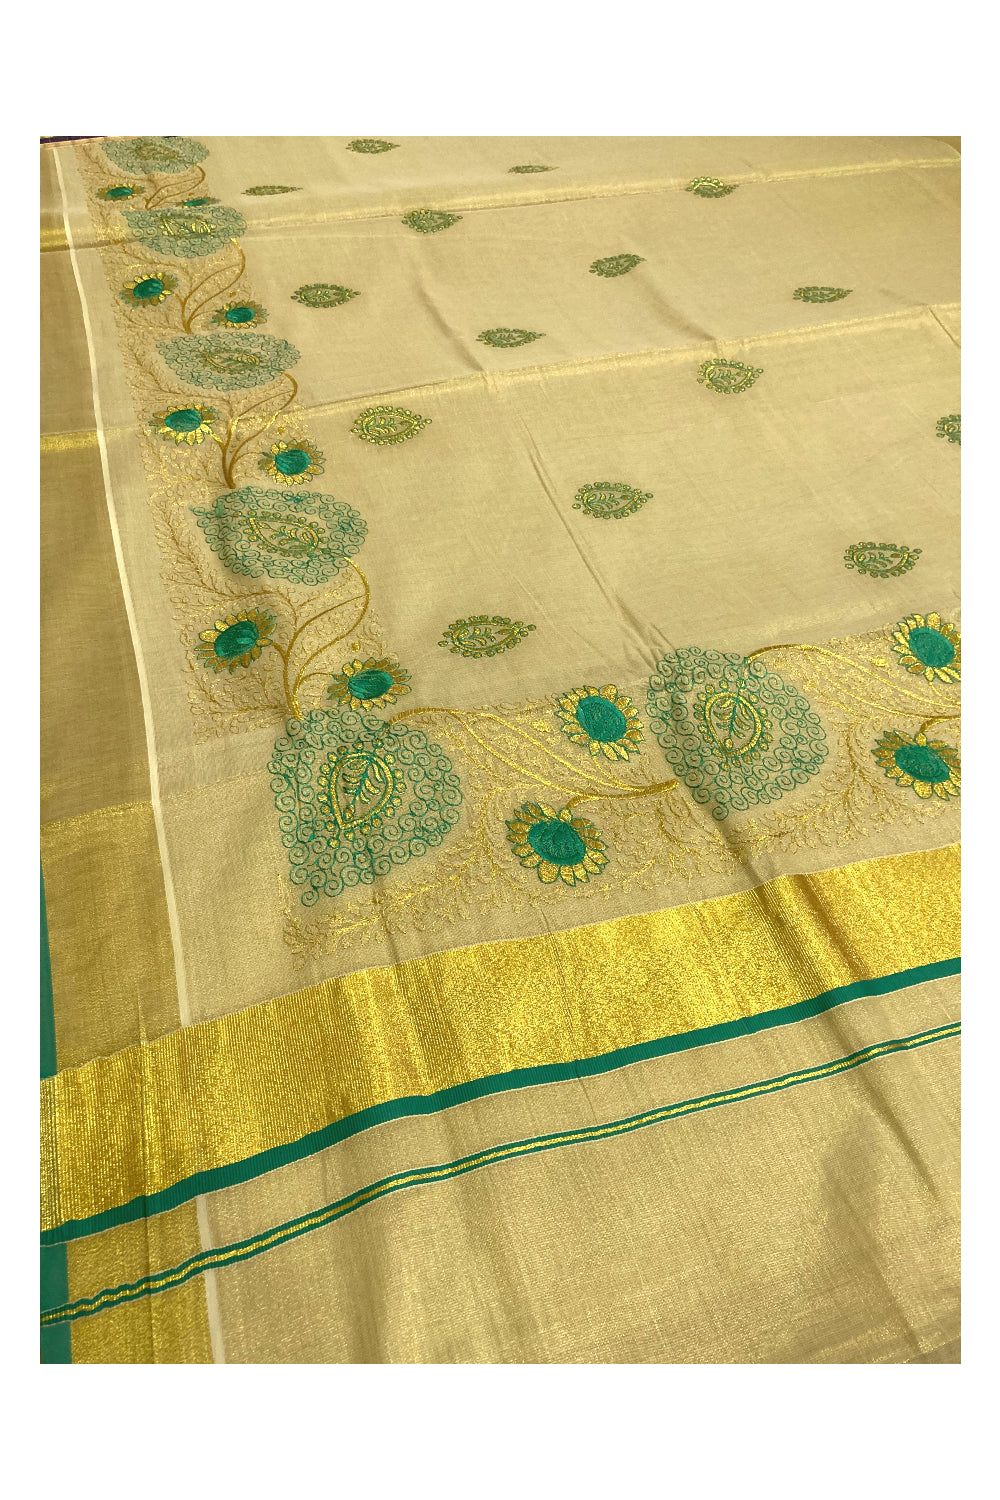 Kerala Tissue Kasavu Heavy Work Saree with Golden and Turquoise Feather Embroidery Design